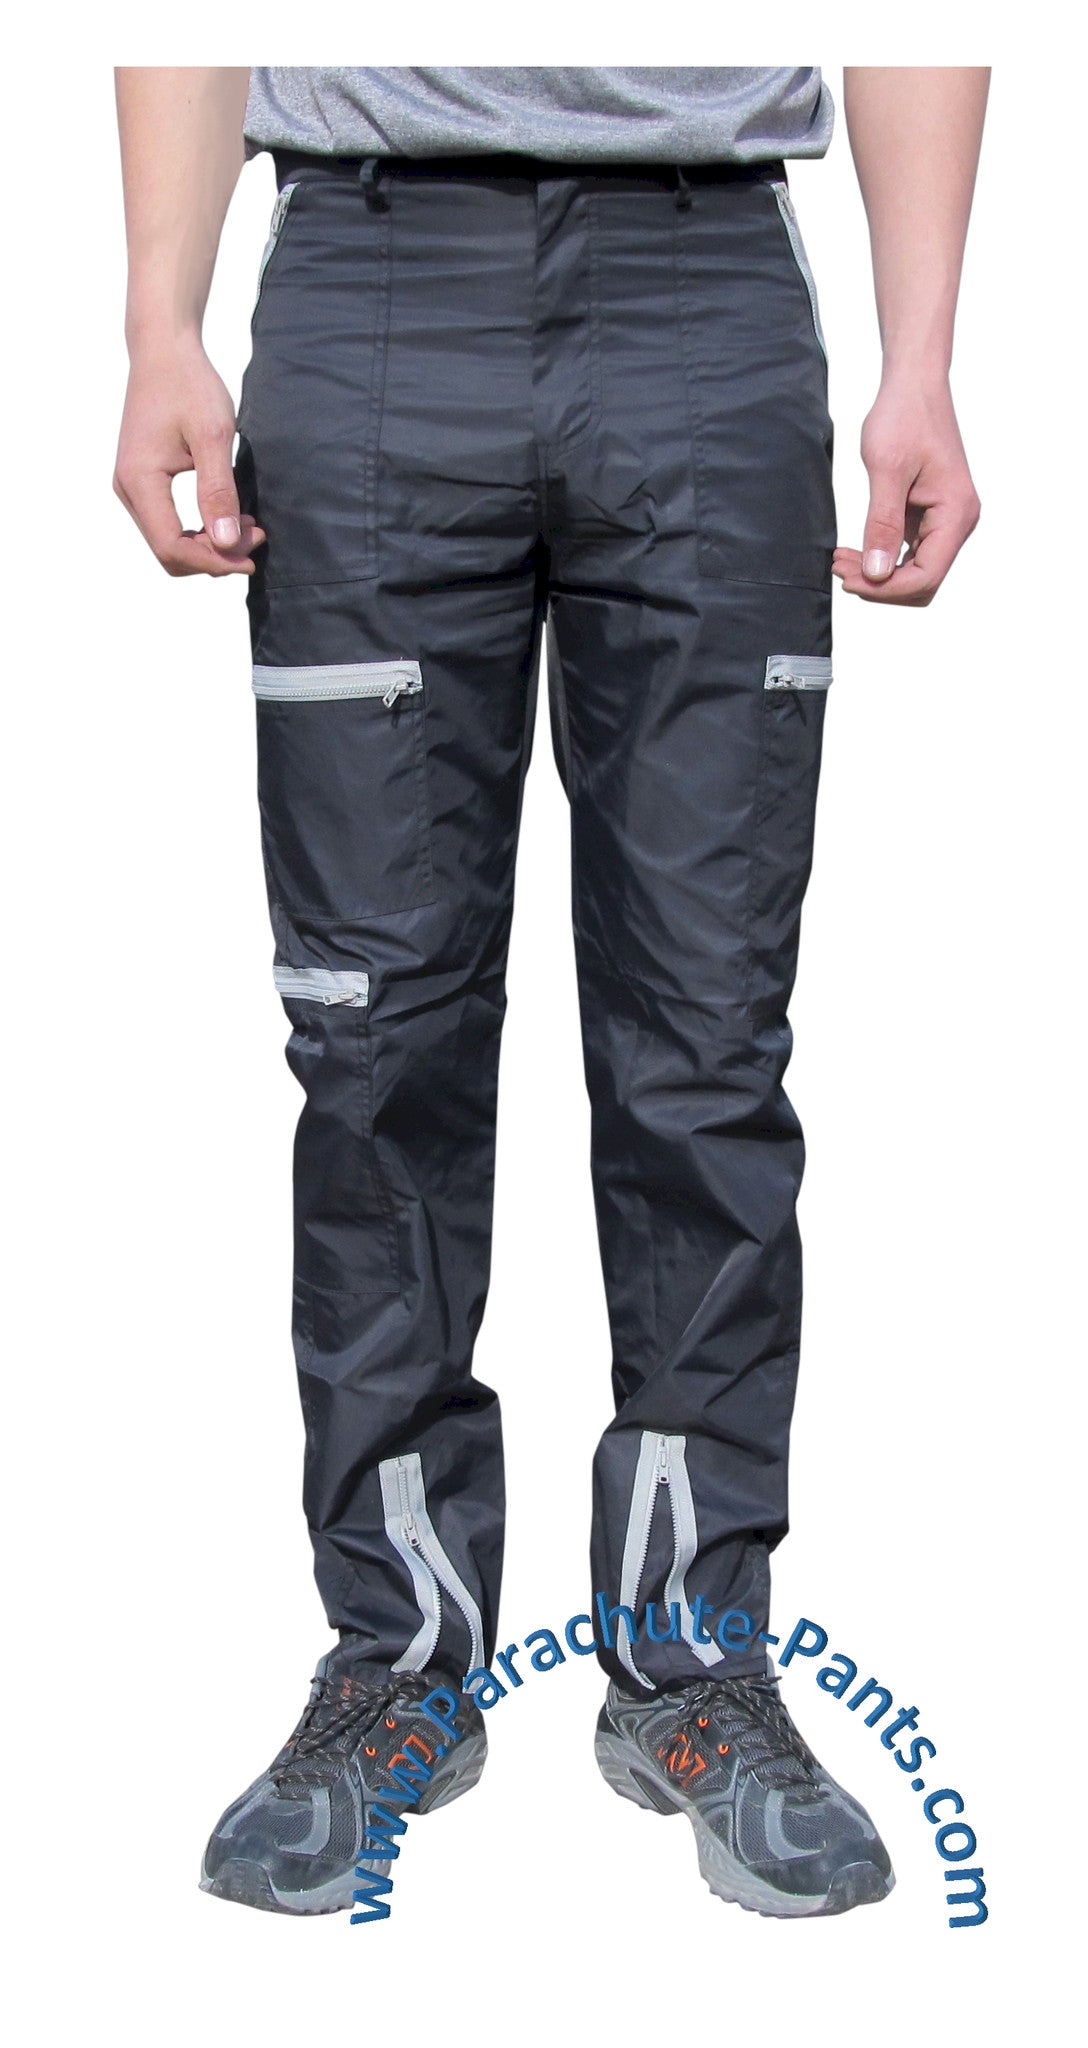 Countdown Black Classic Nylon Parachute Pants with Grey Zippers | The ...